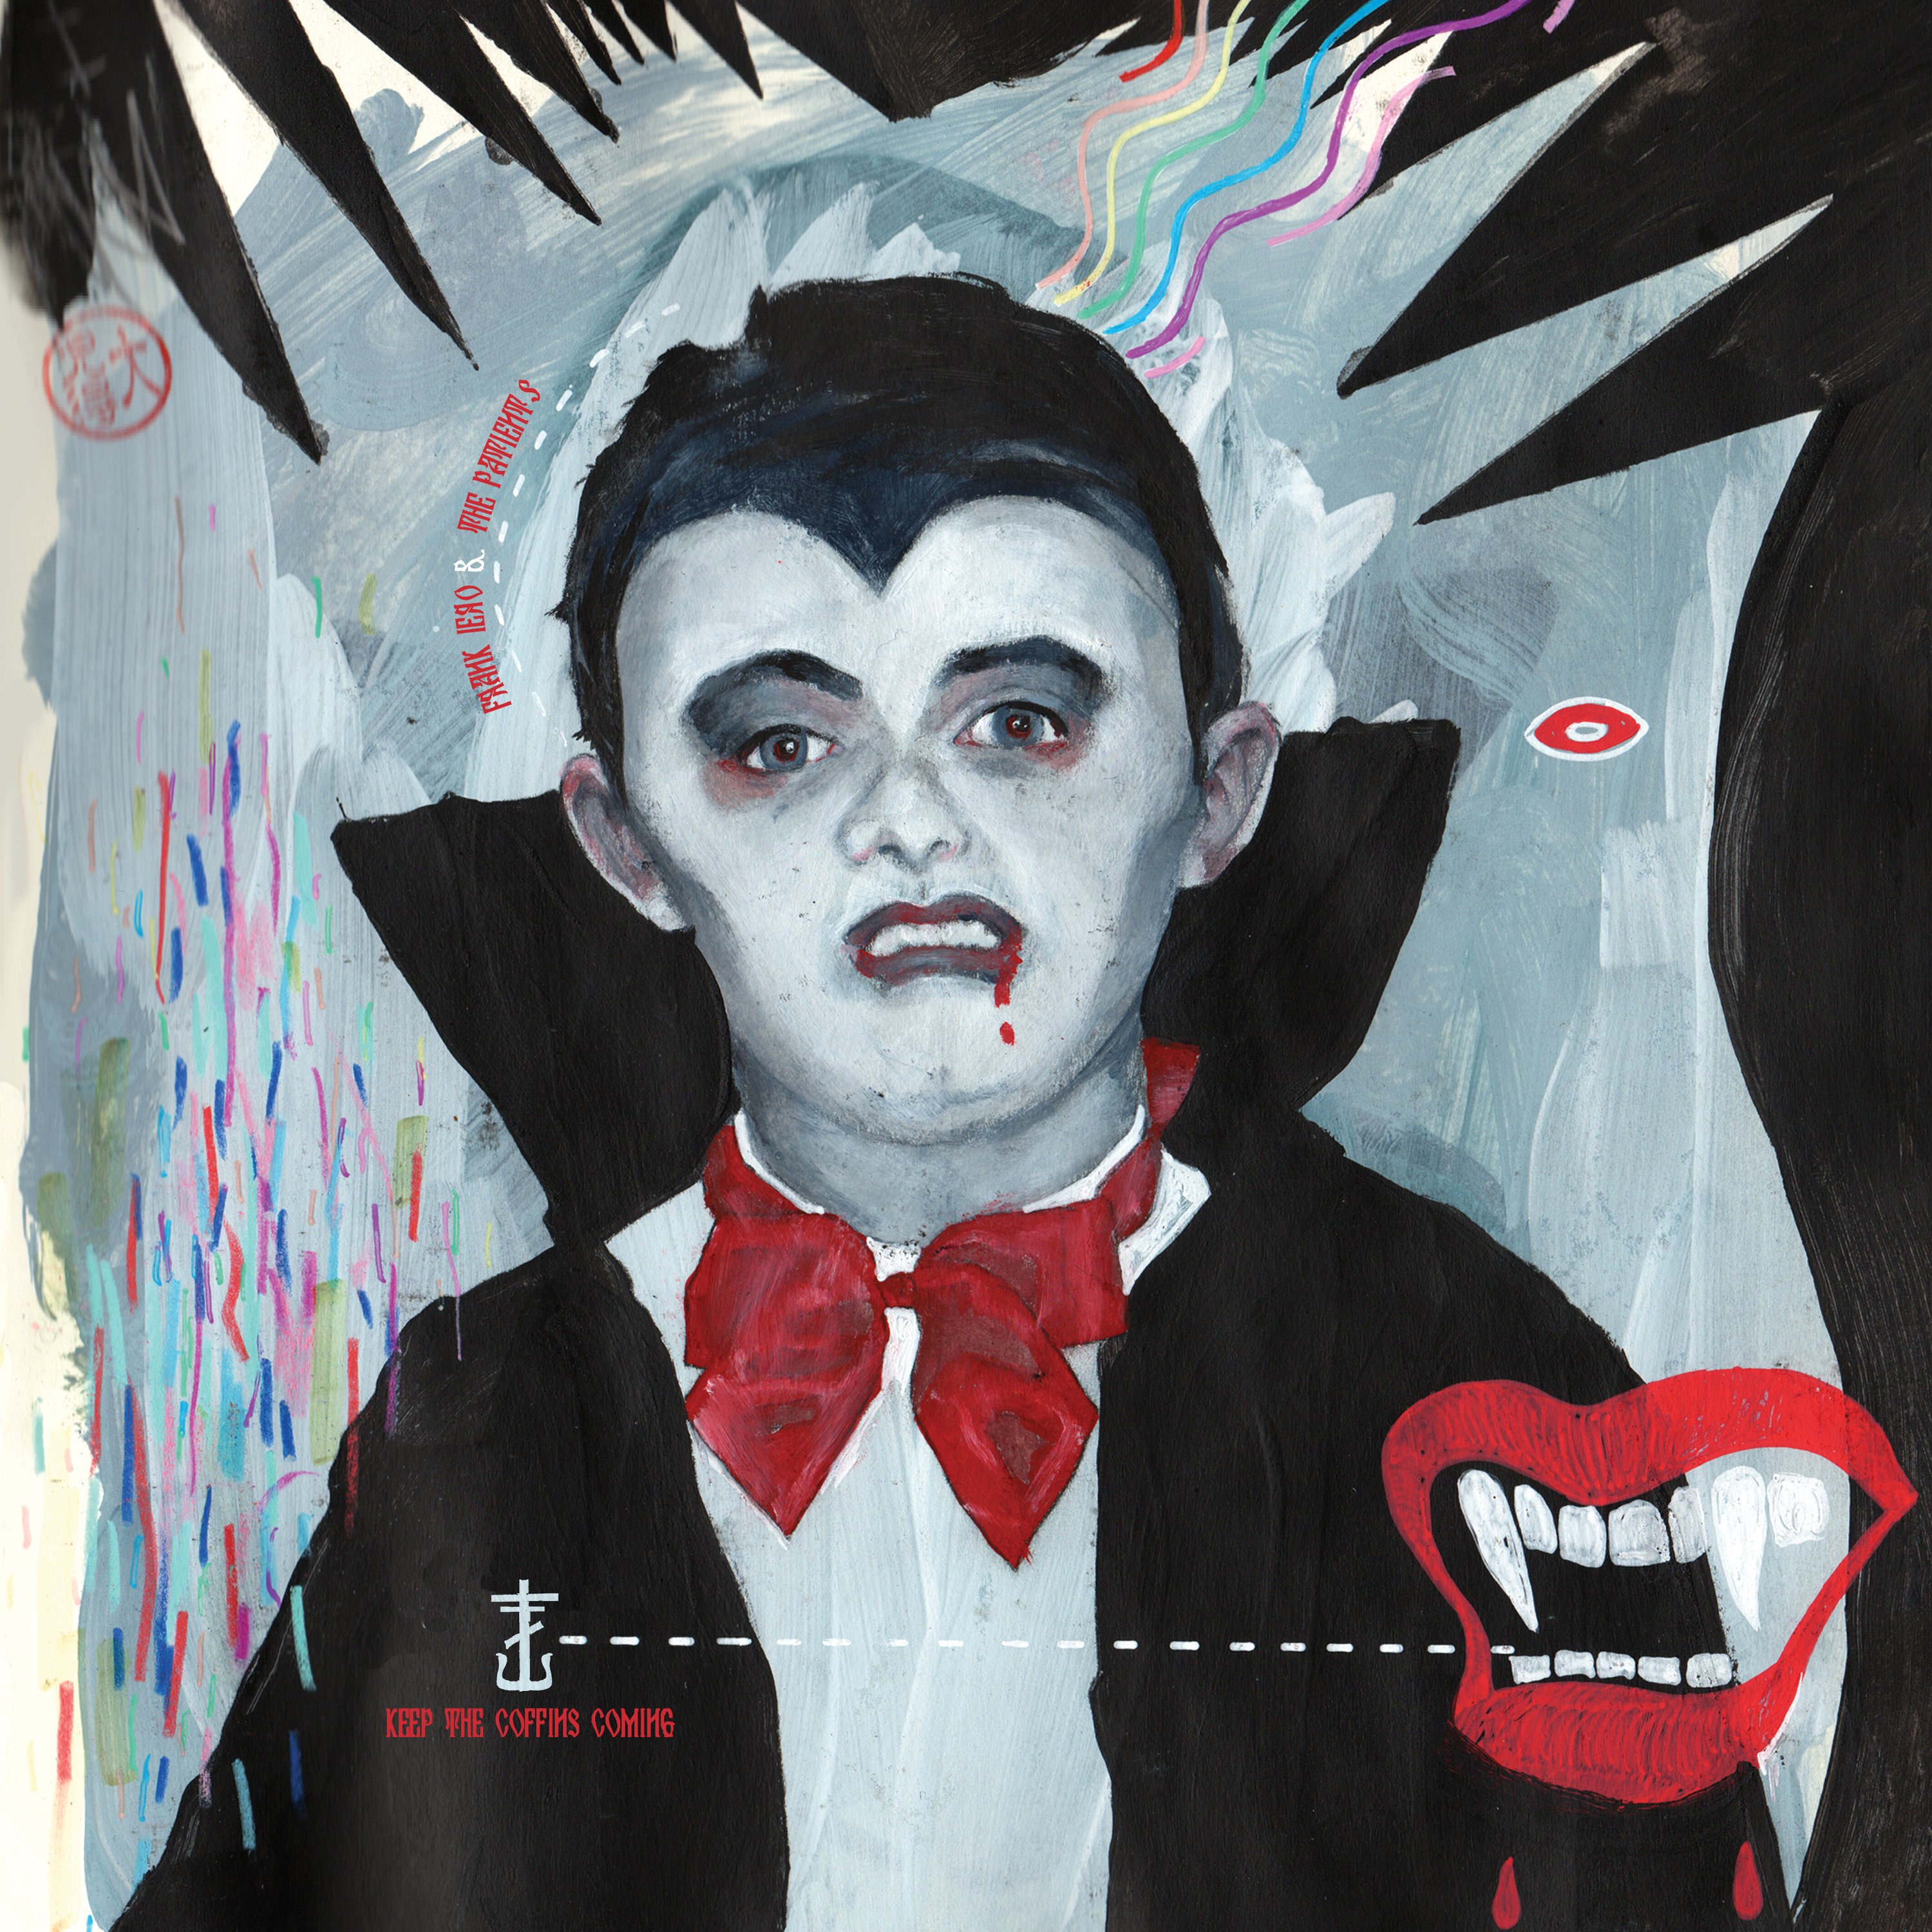 FRANK IERO and the PATIENCE’S NEW EP “KEEP THE COFFINS COMING” AVAILABLE TODAY